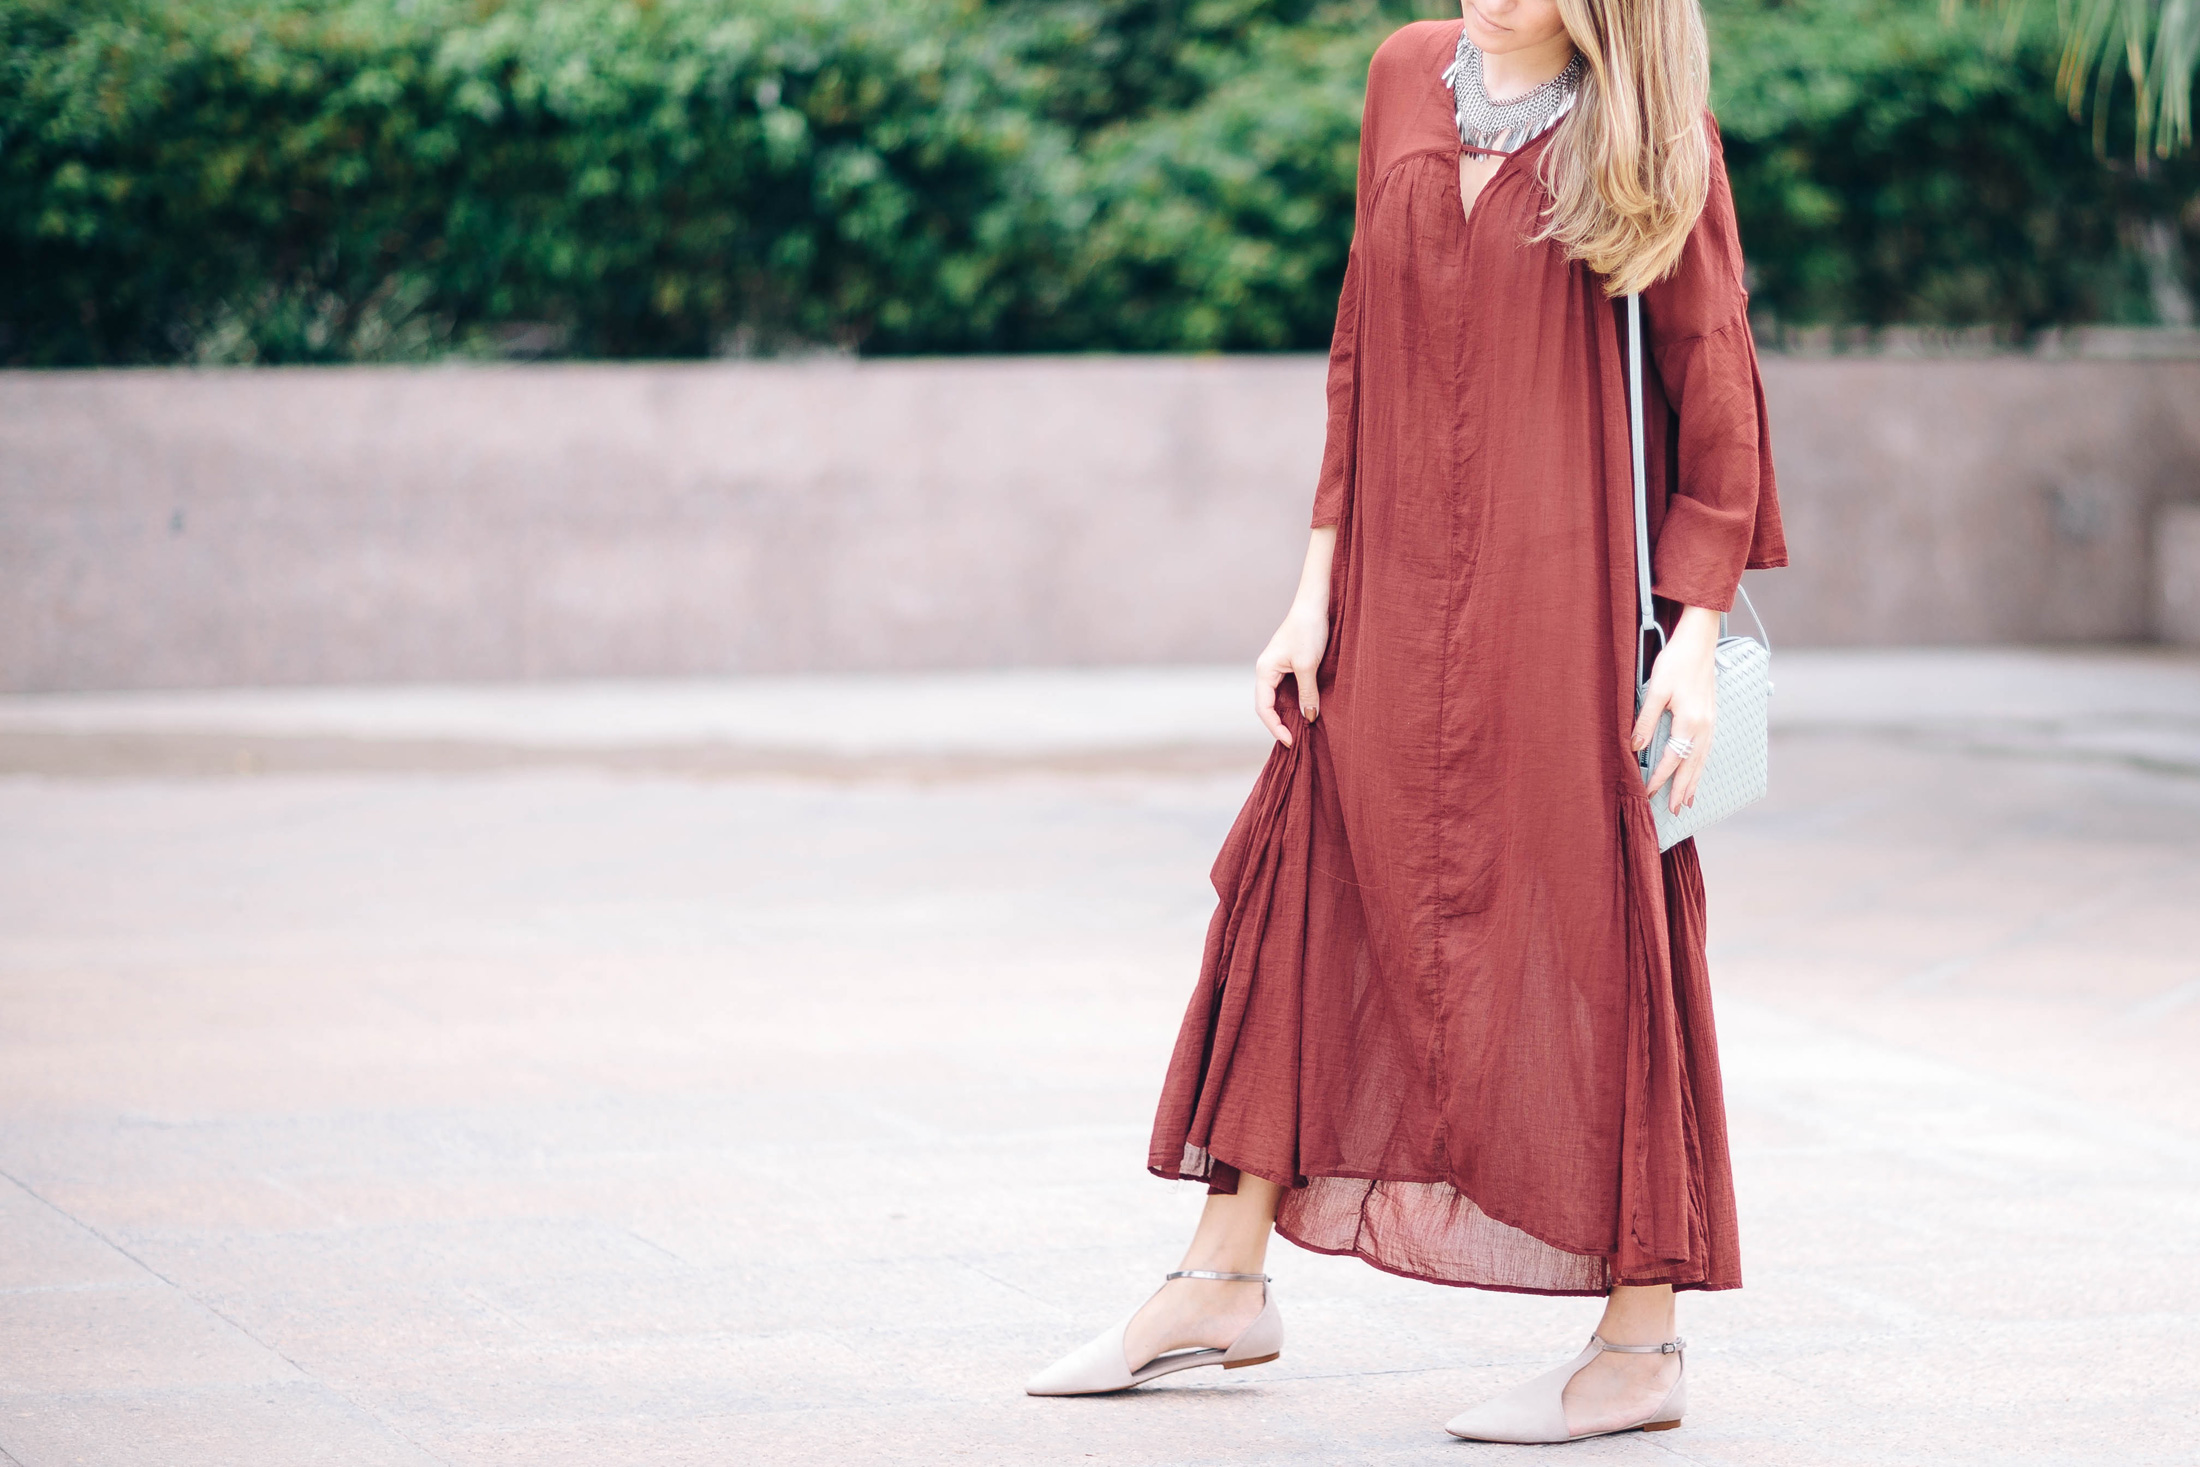 Maristella Gonzalez of A Constellation blog wears a burgundy Maxi dress from H&M with nude Zara flats and YSL necklace